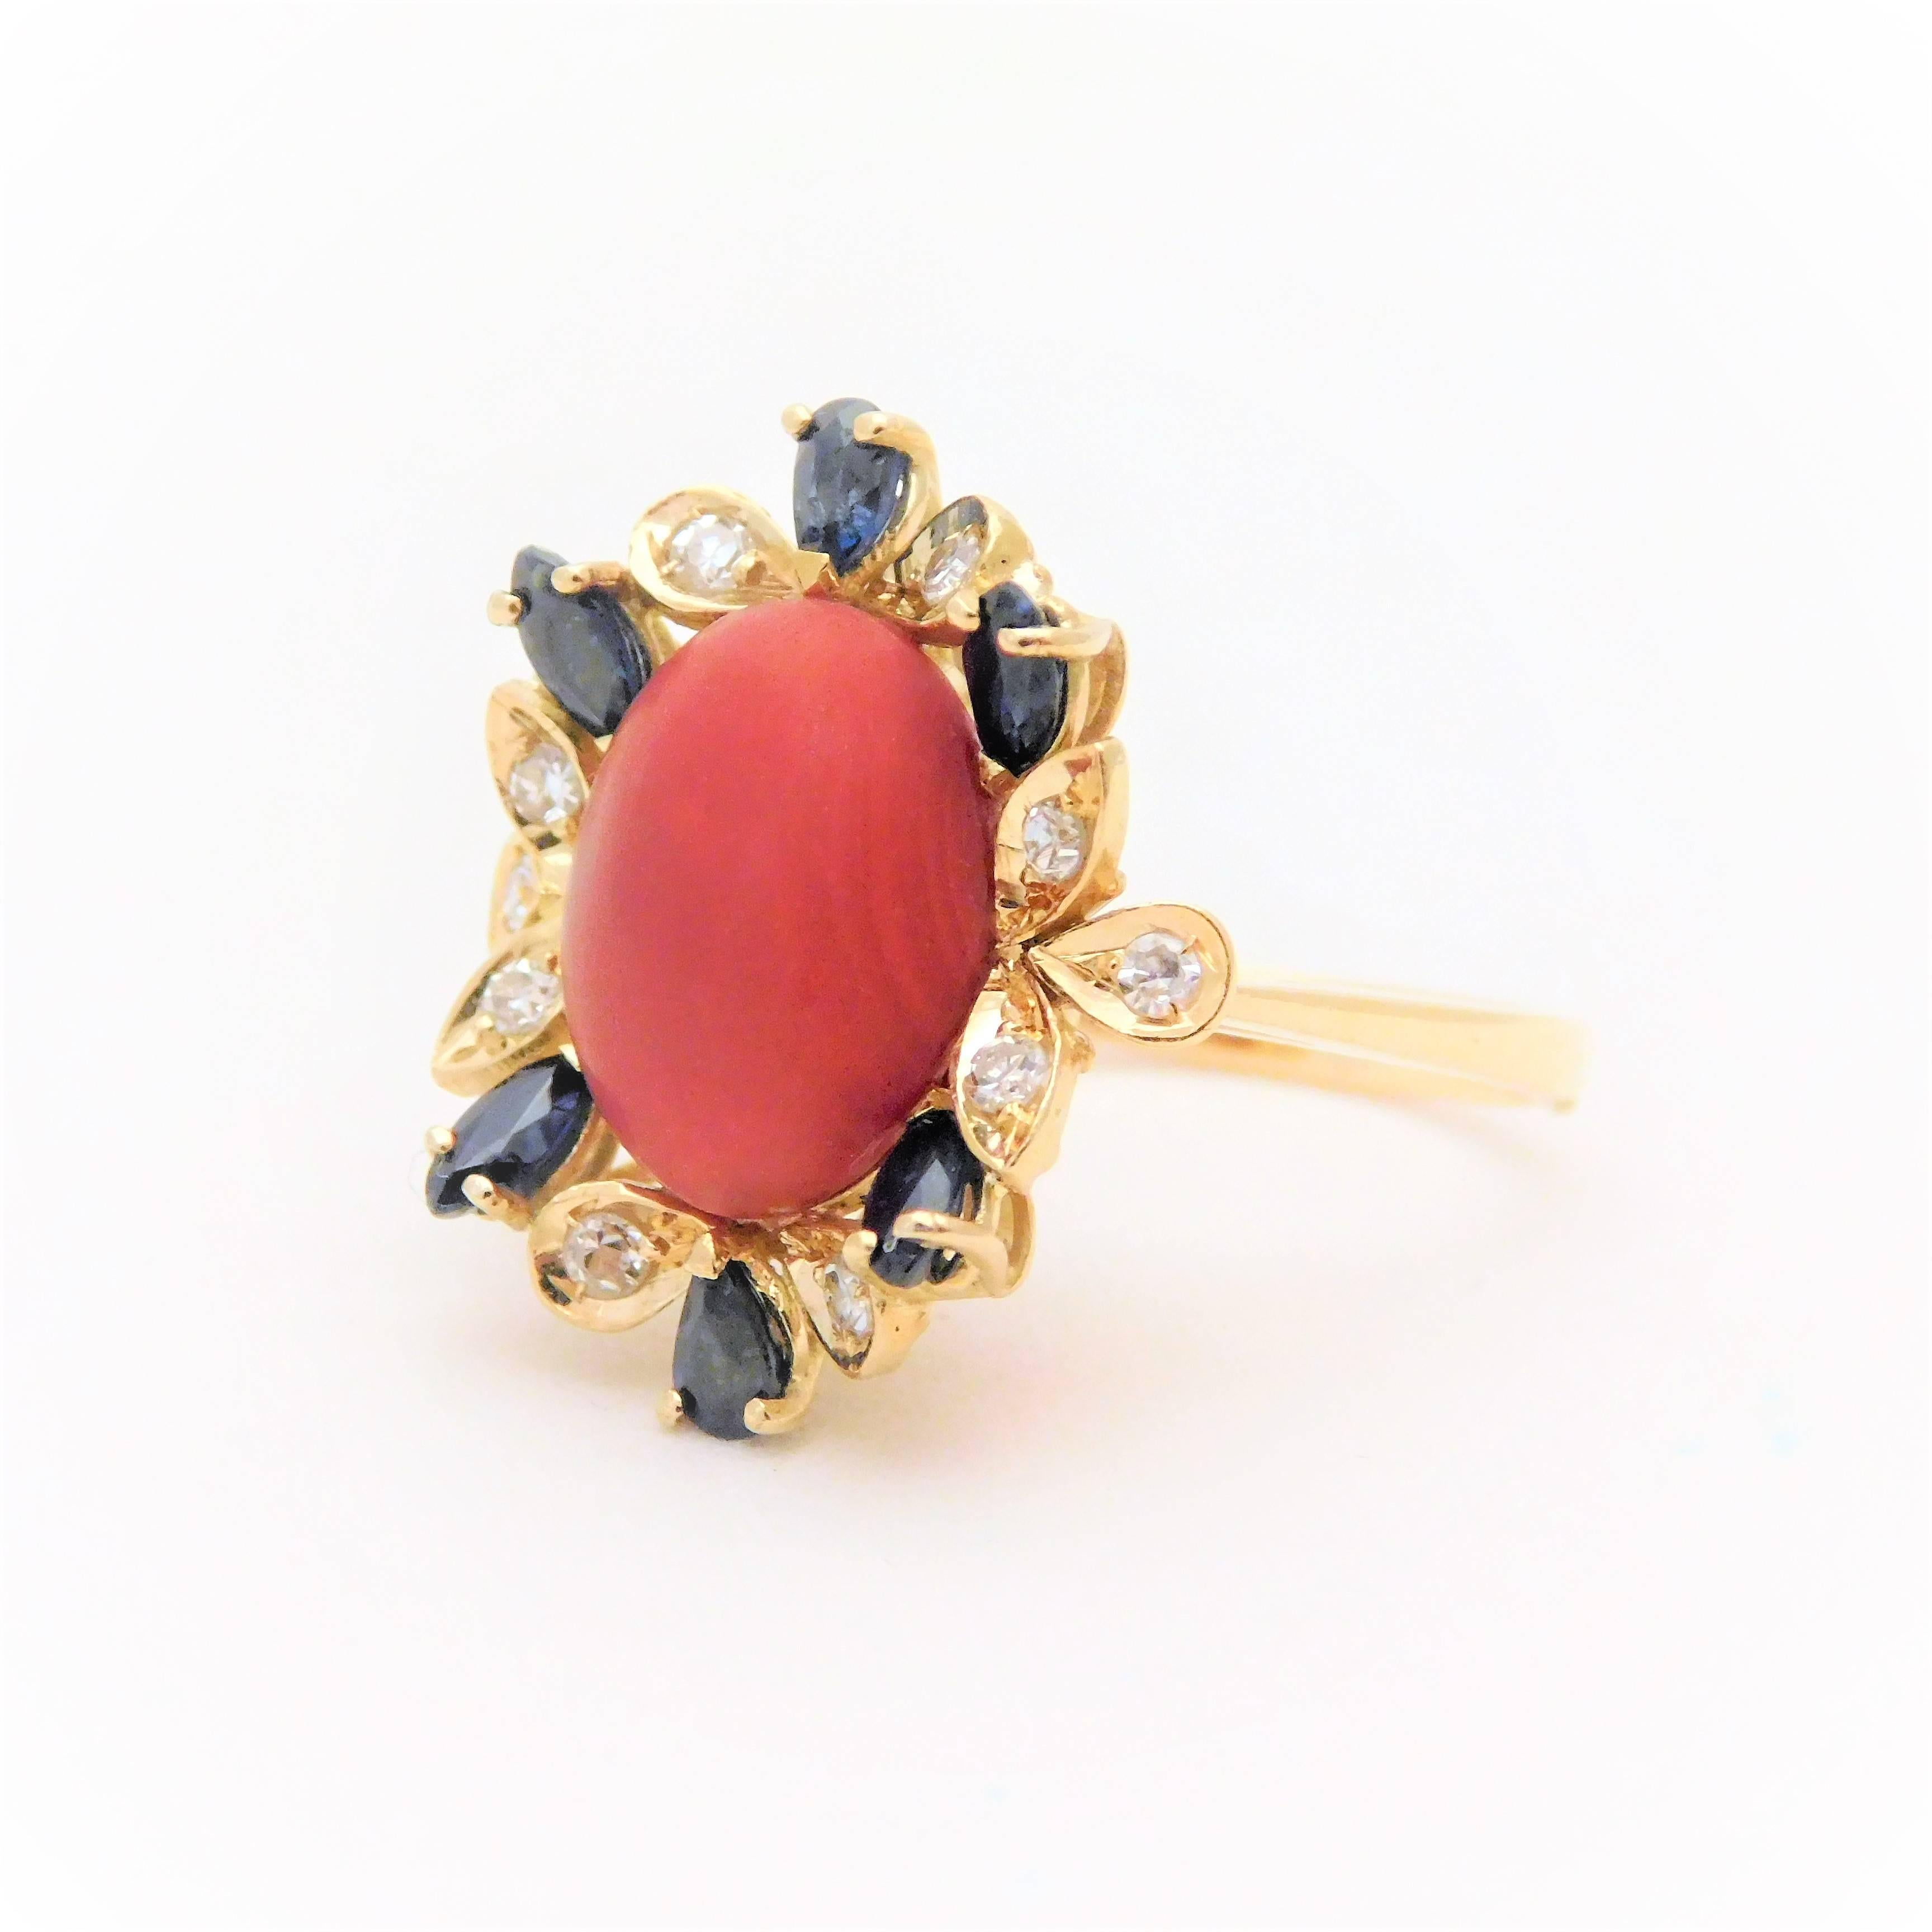 Oval Cut Coral Cabochon, Sapphire, and Spinel Cocktail Ring